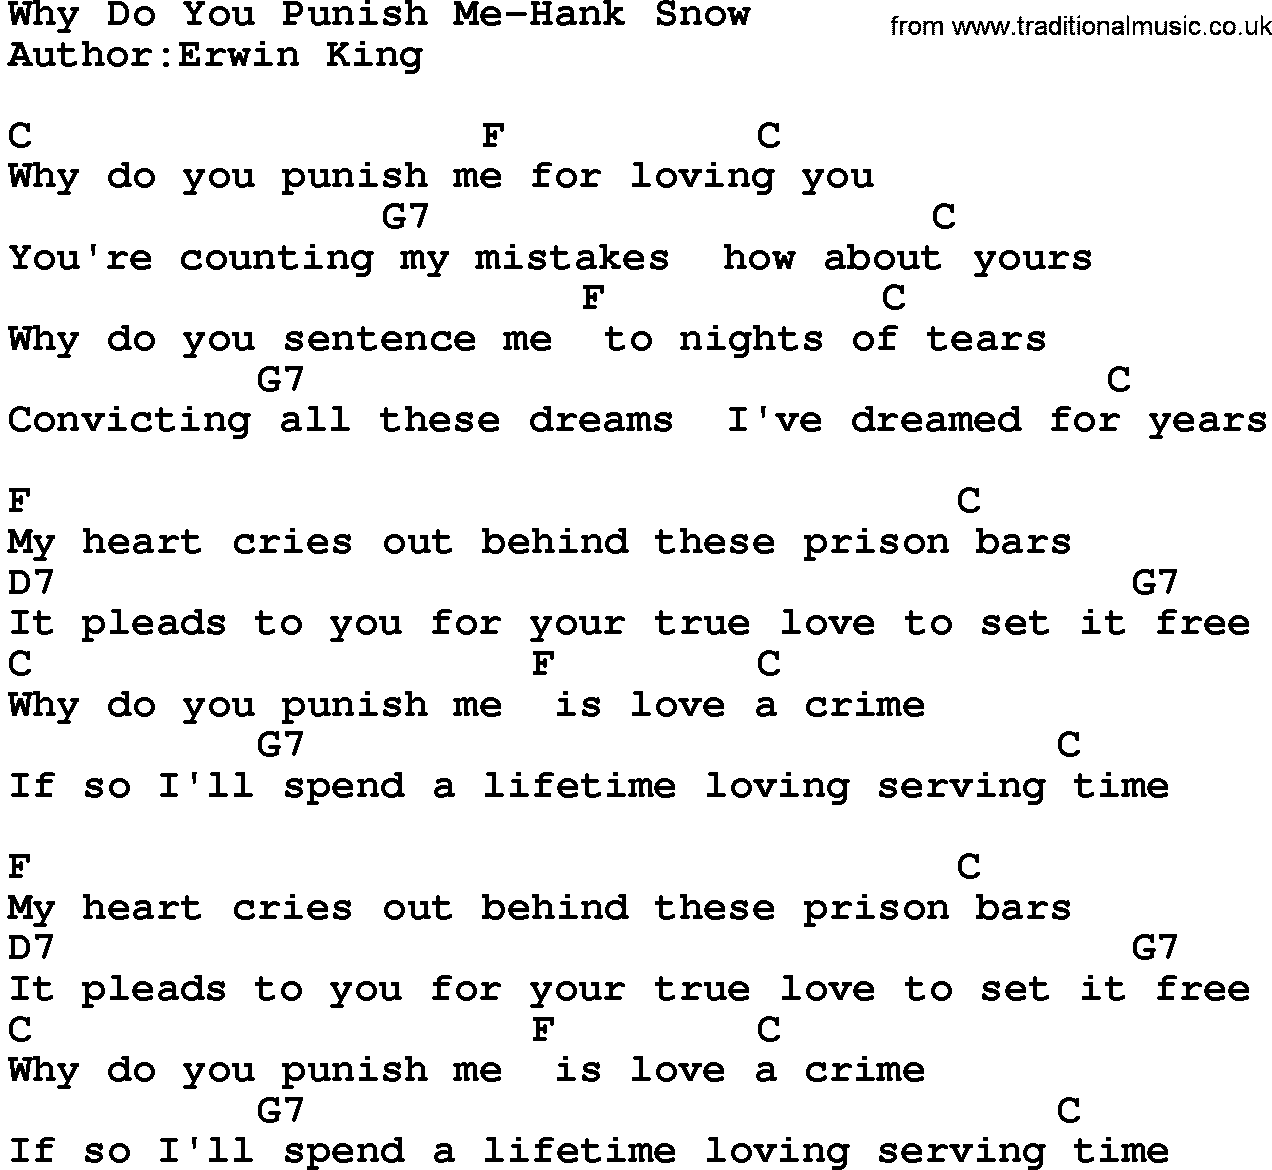 Country music song: Why Do You Punish Me-Hank Snow lyrics and chords